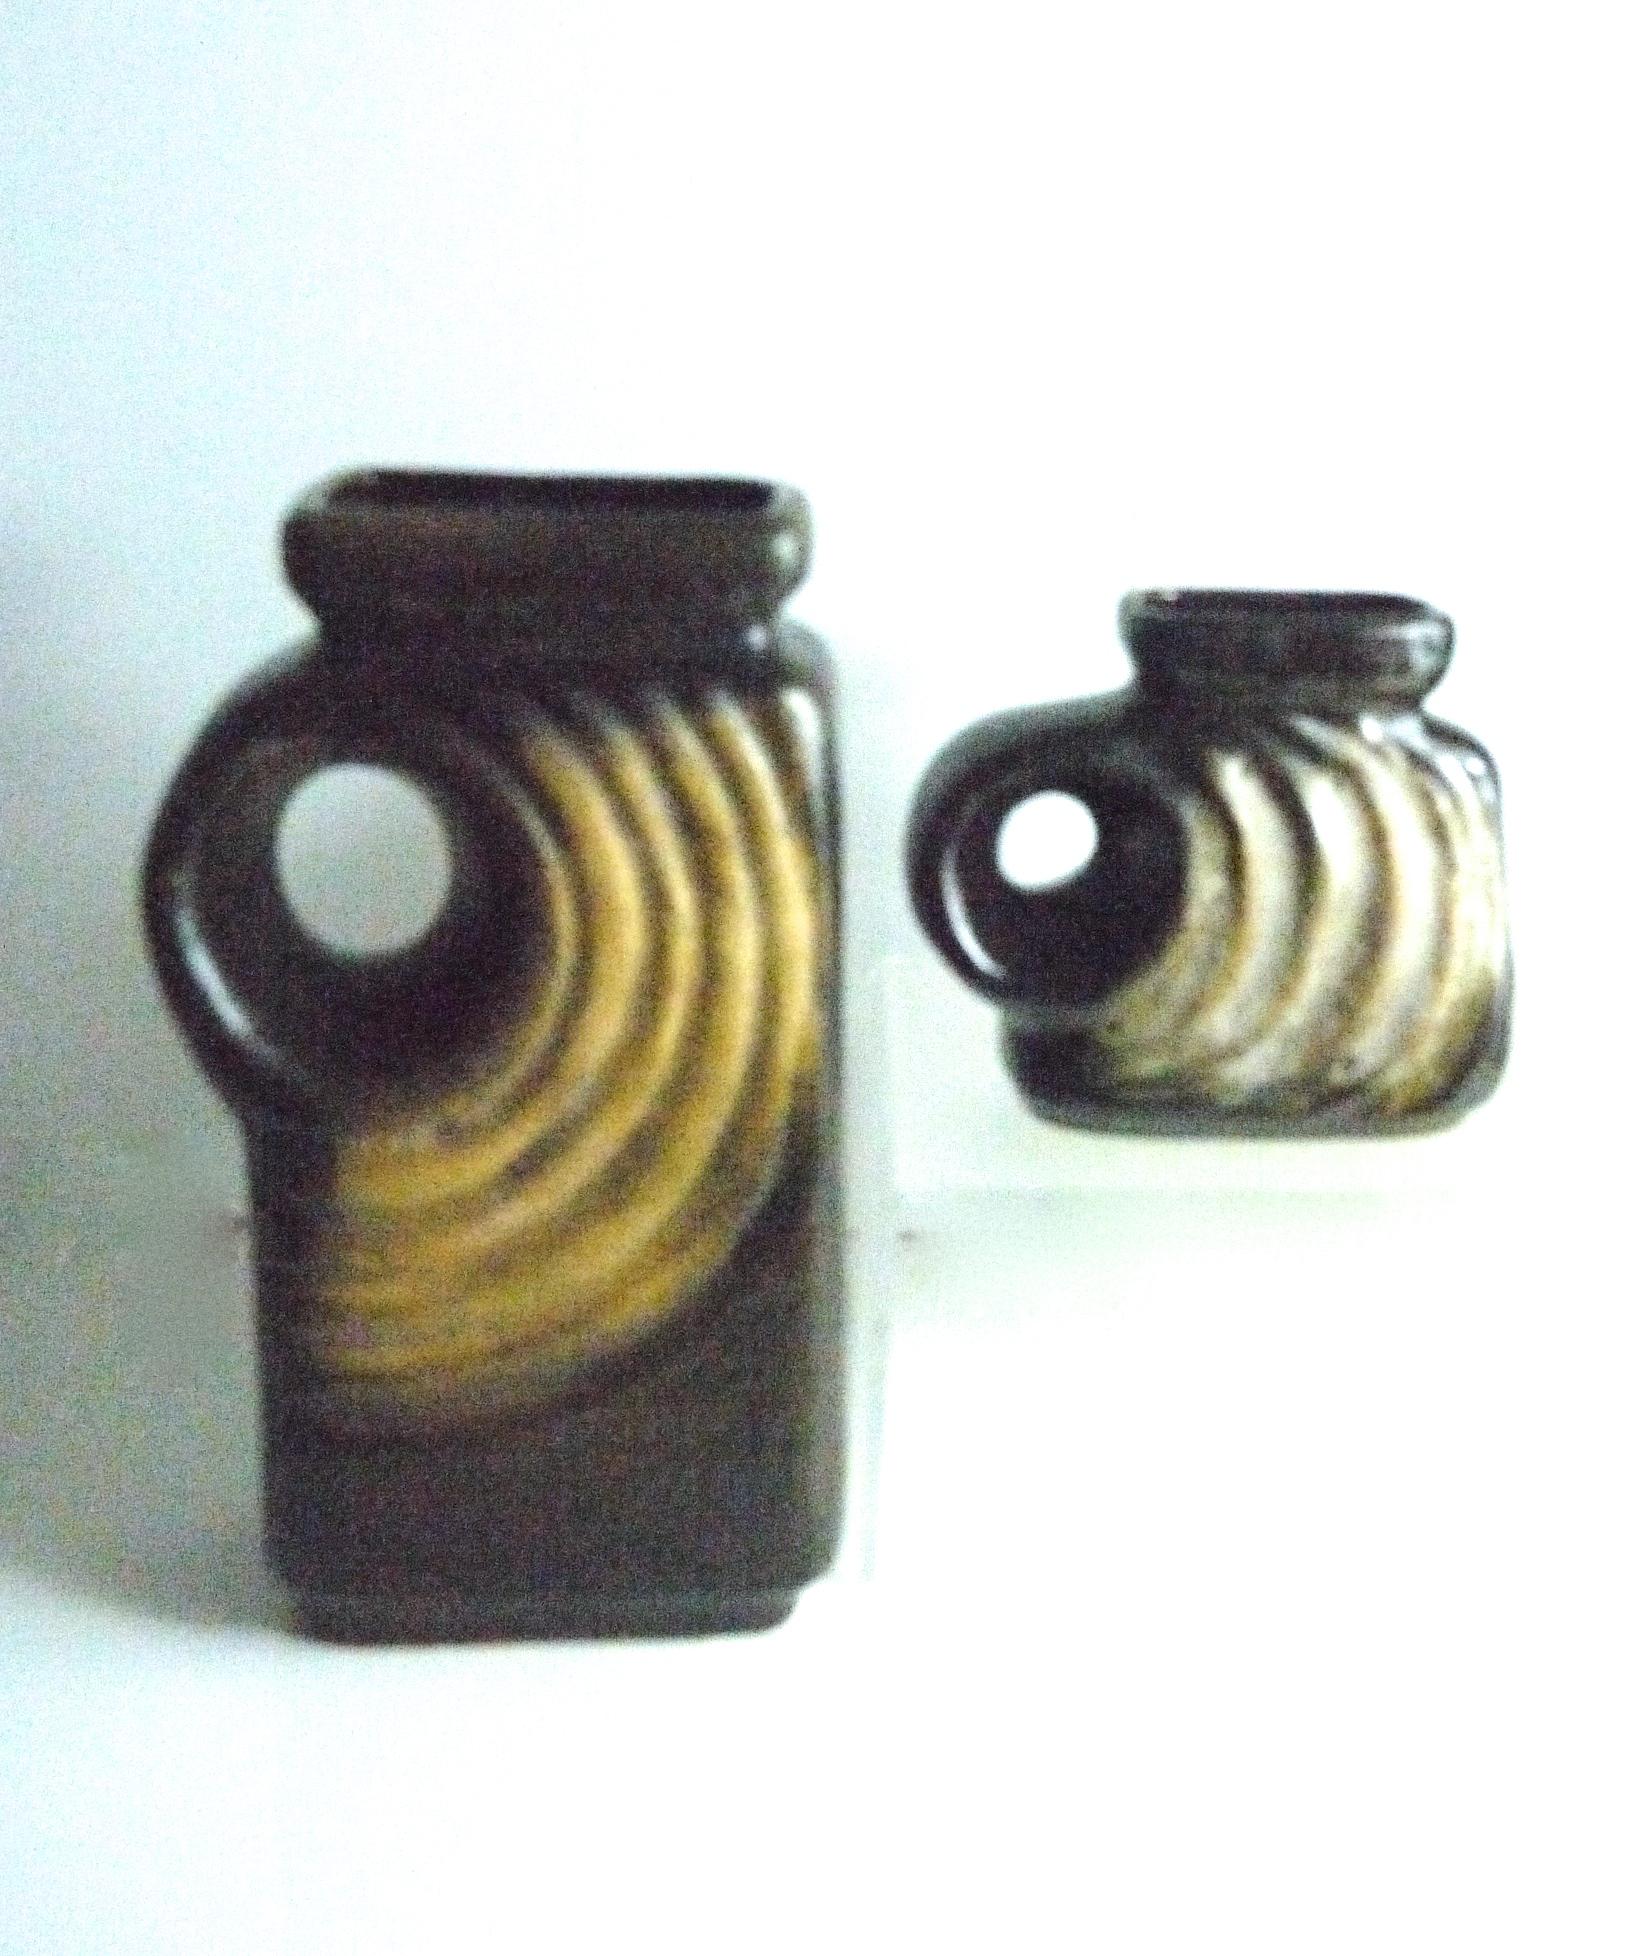 Brutalist Space Age Ceramic Chimney Vases Walter Becht Late 1960s Germany, Pair For Sale 7